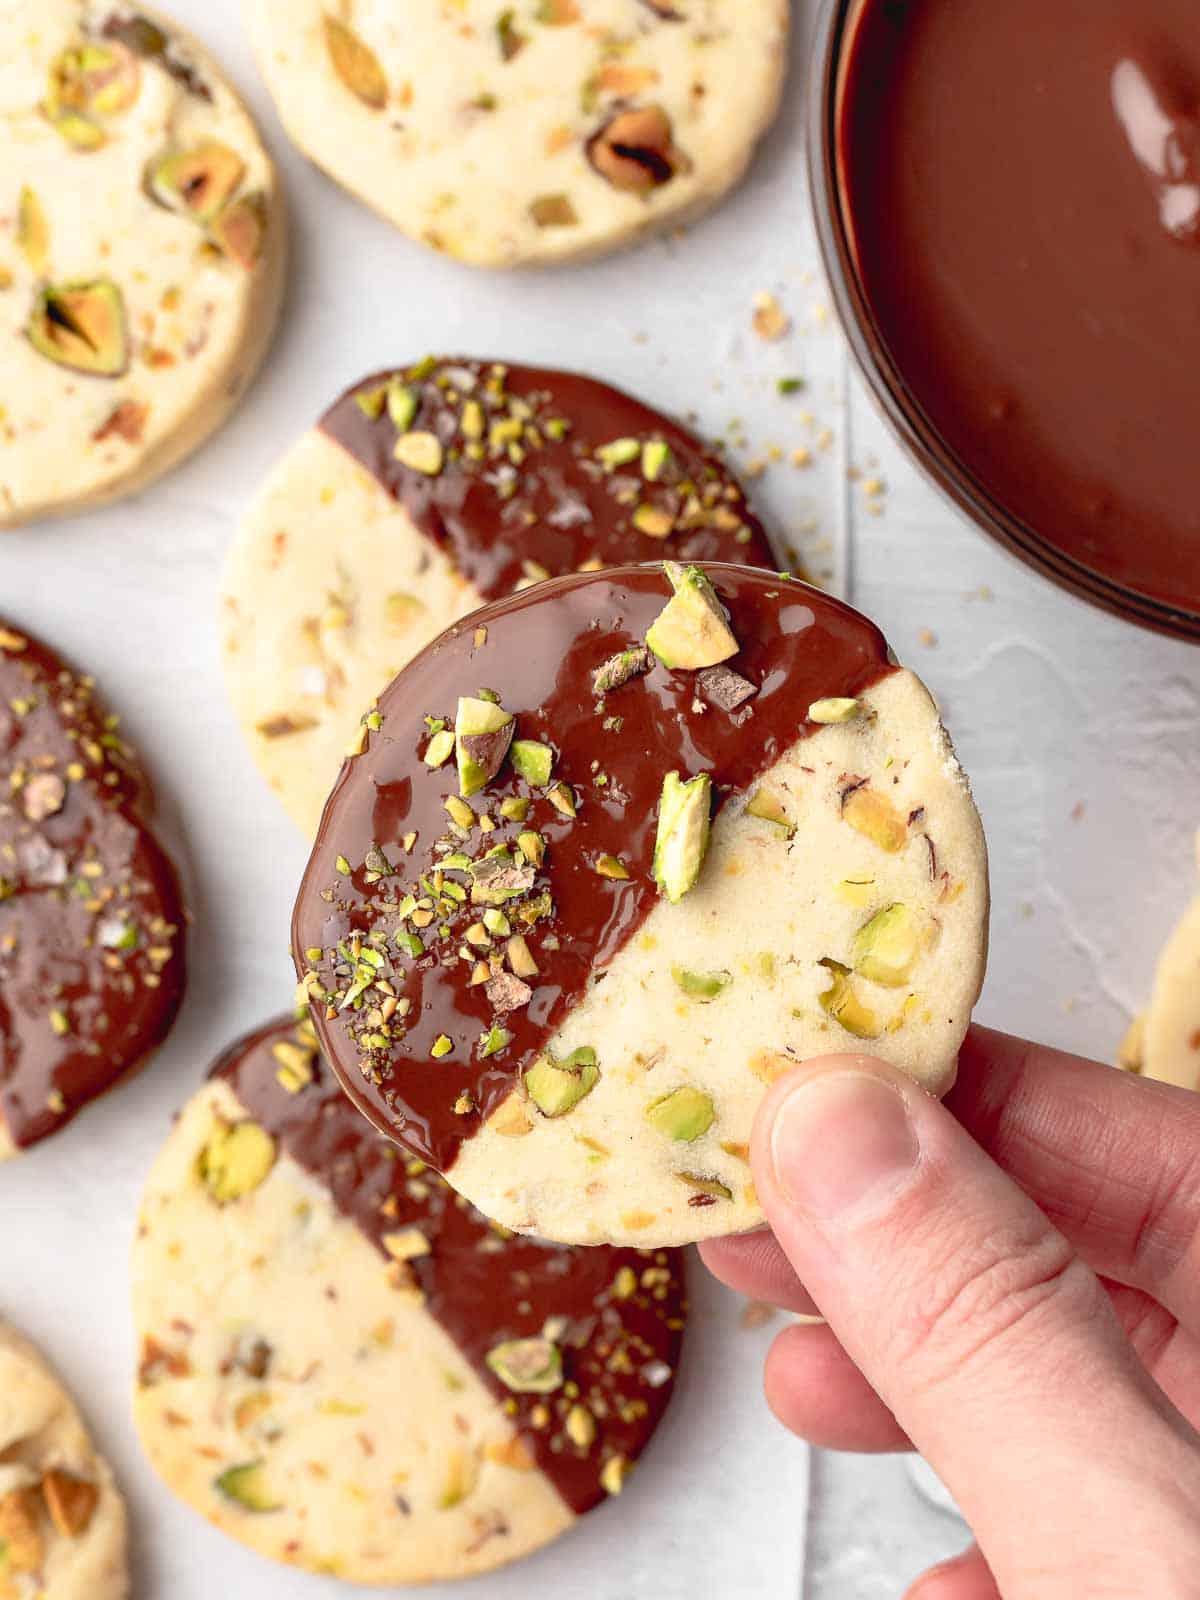 Shortbread cookies dipped in chocolate and topped with pistachios.